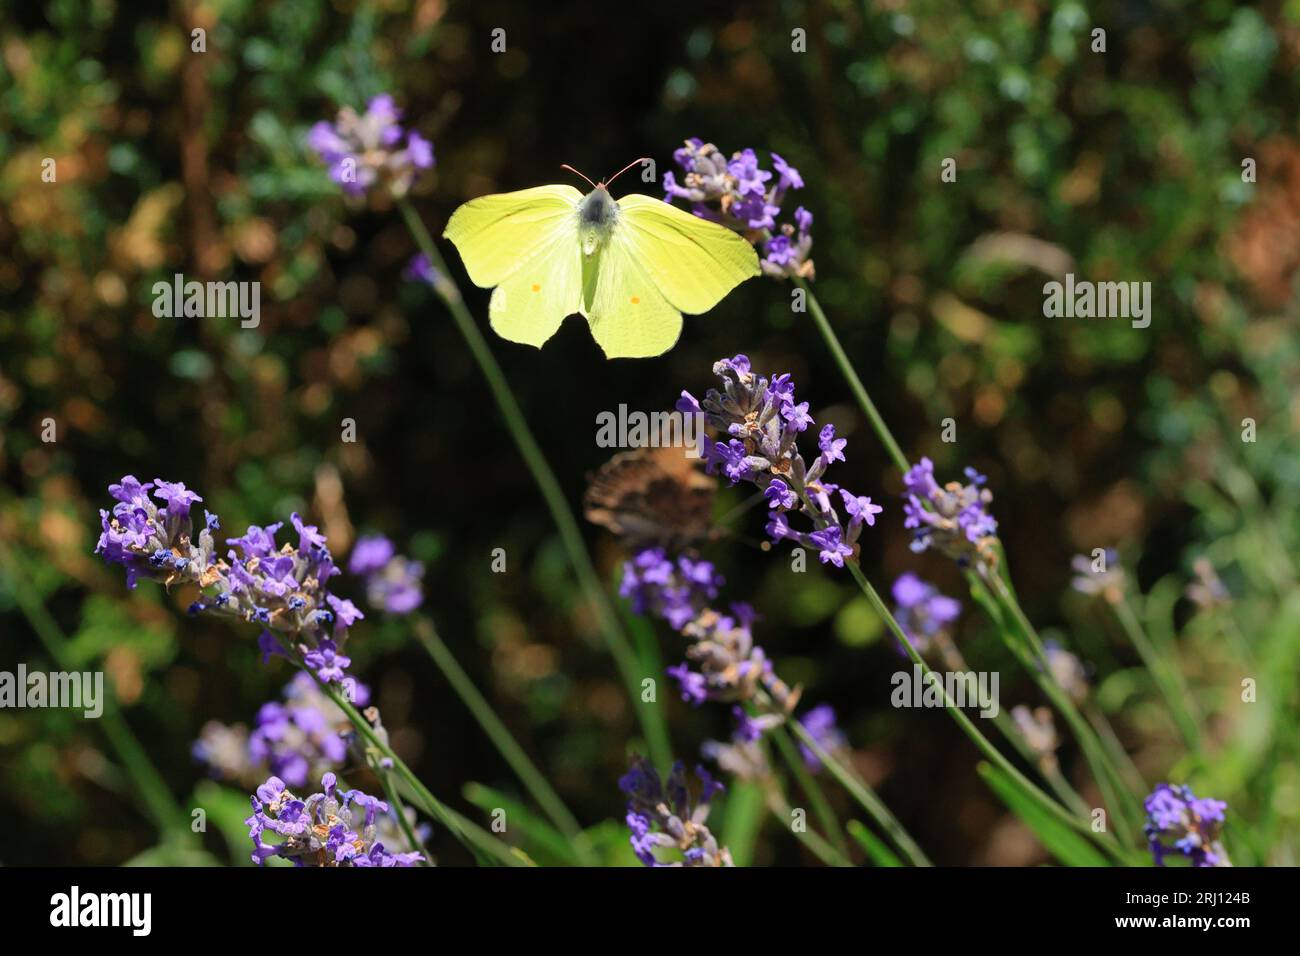 close up of a brimstone butterfly amidst blooming lavender Stock Photo